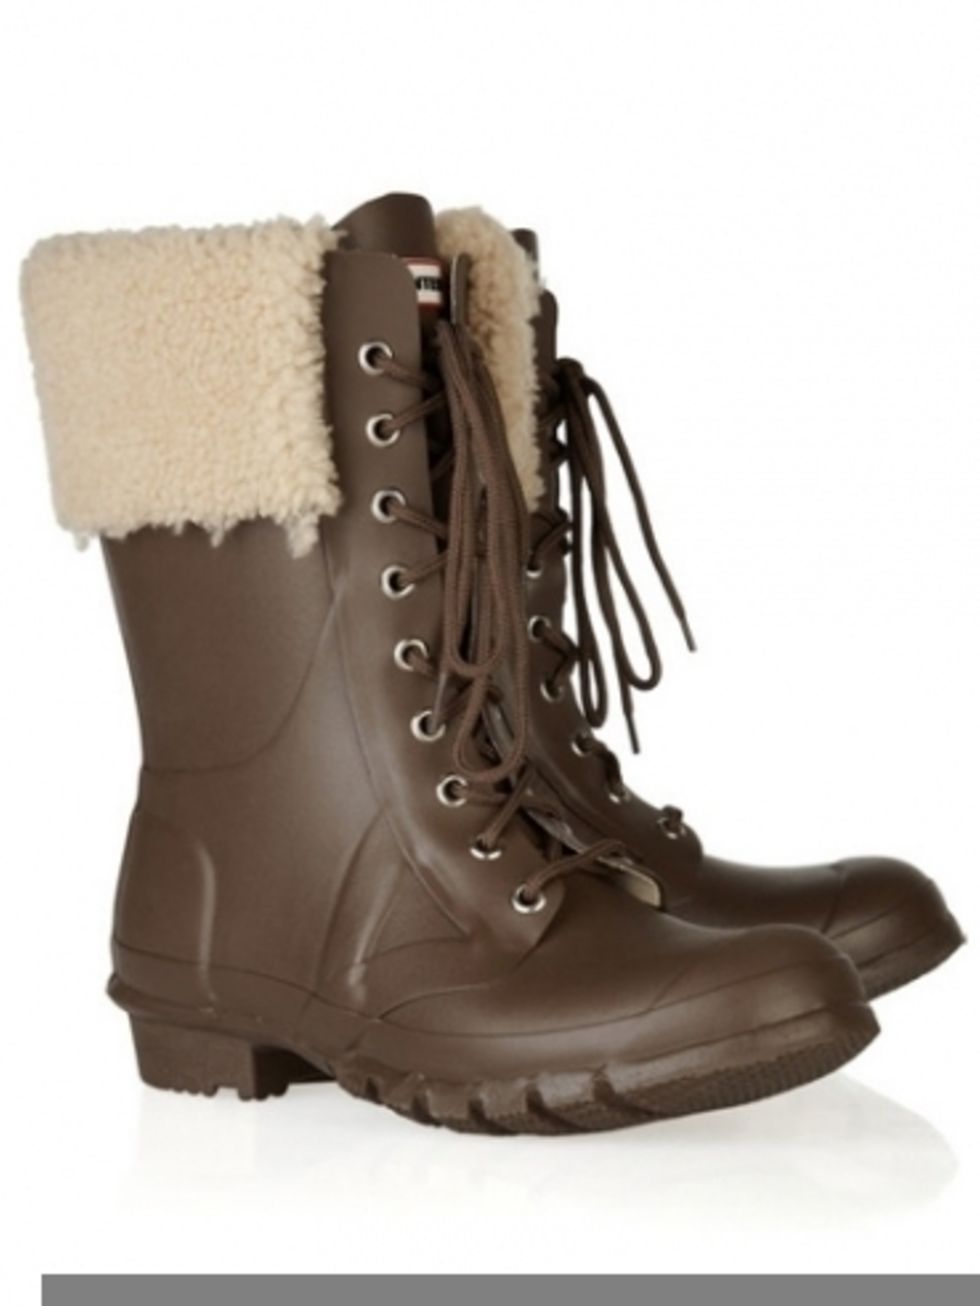 Footwear, Brown, Boot, White, Tan, Work boots, Fashion, Black, Steel-toe boot, Leather, 